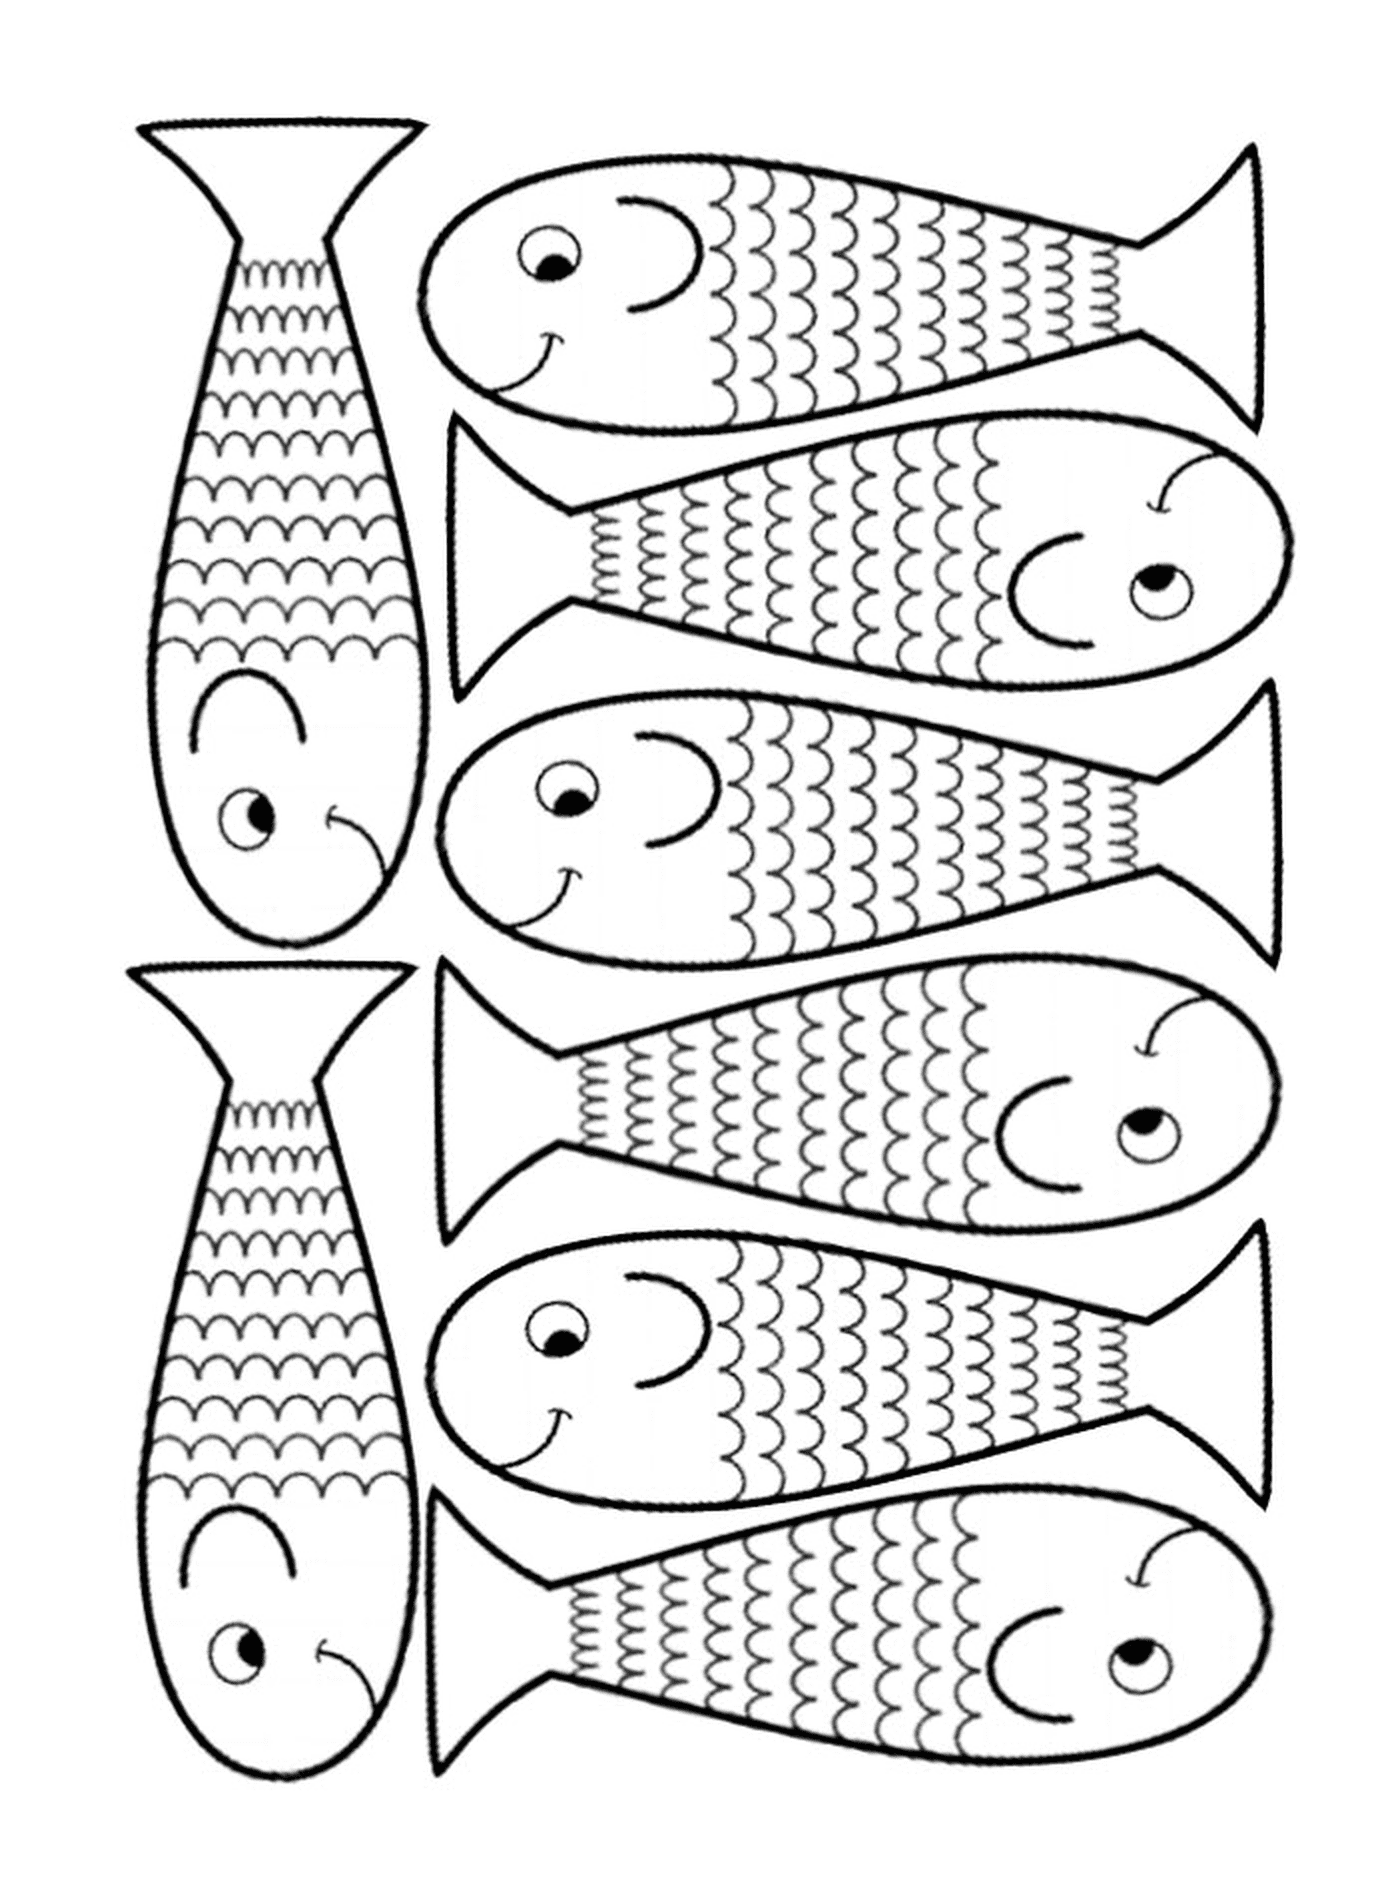  Possibility to draw several fish 